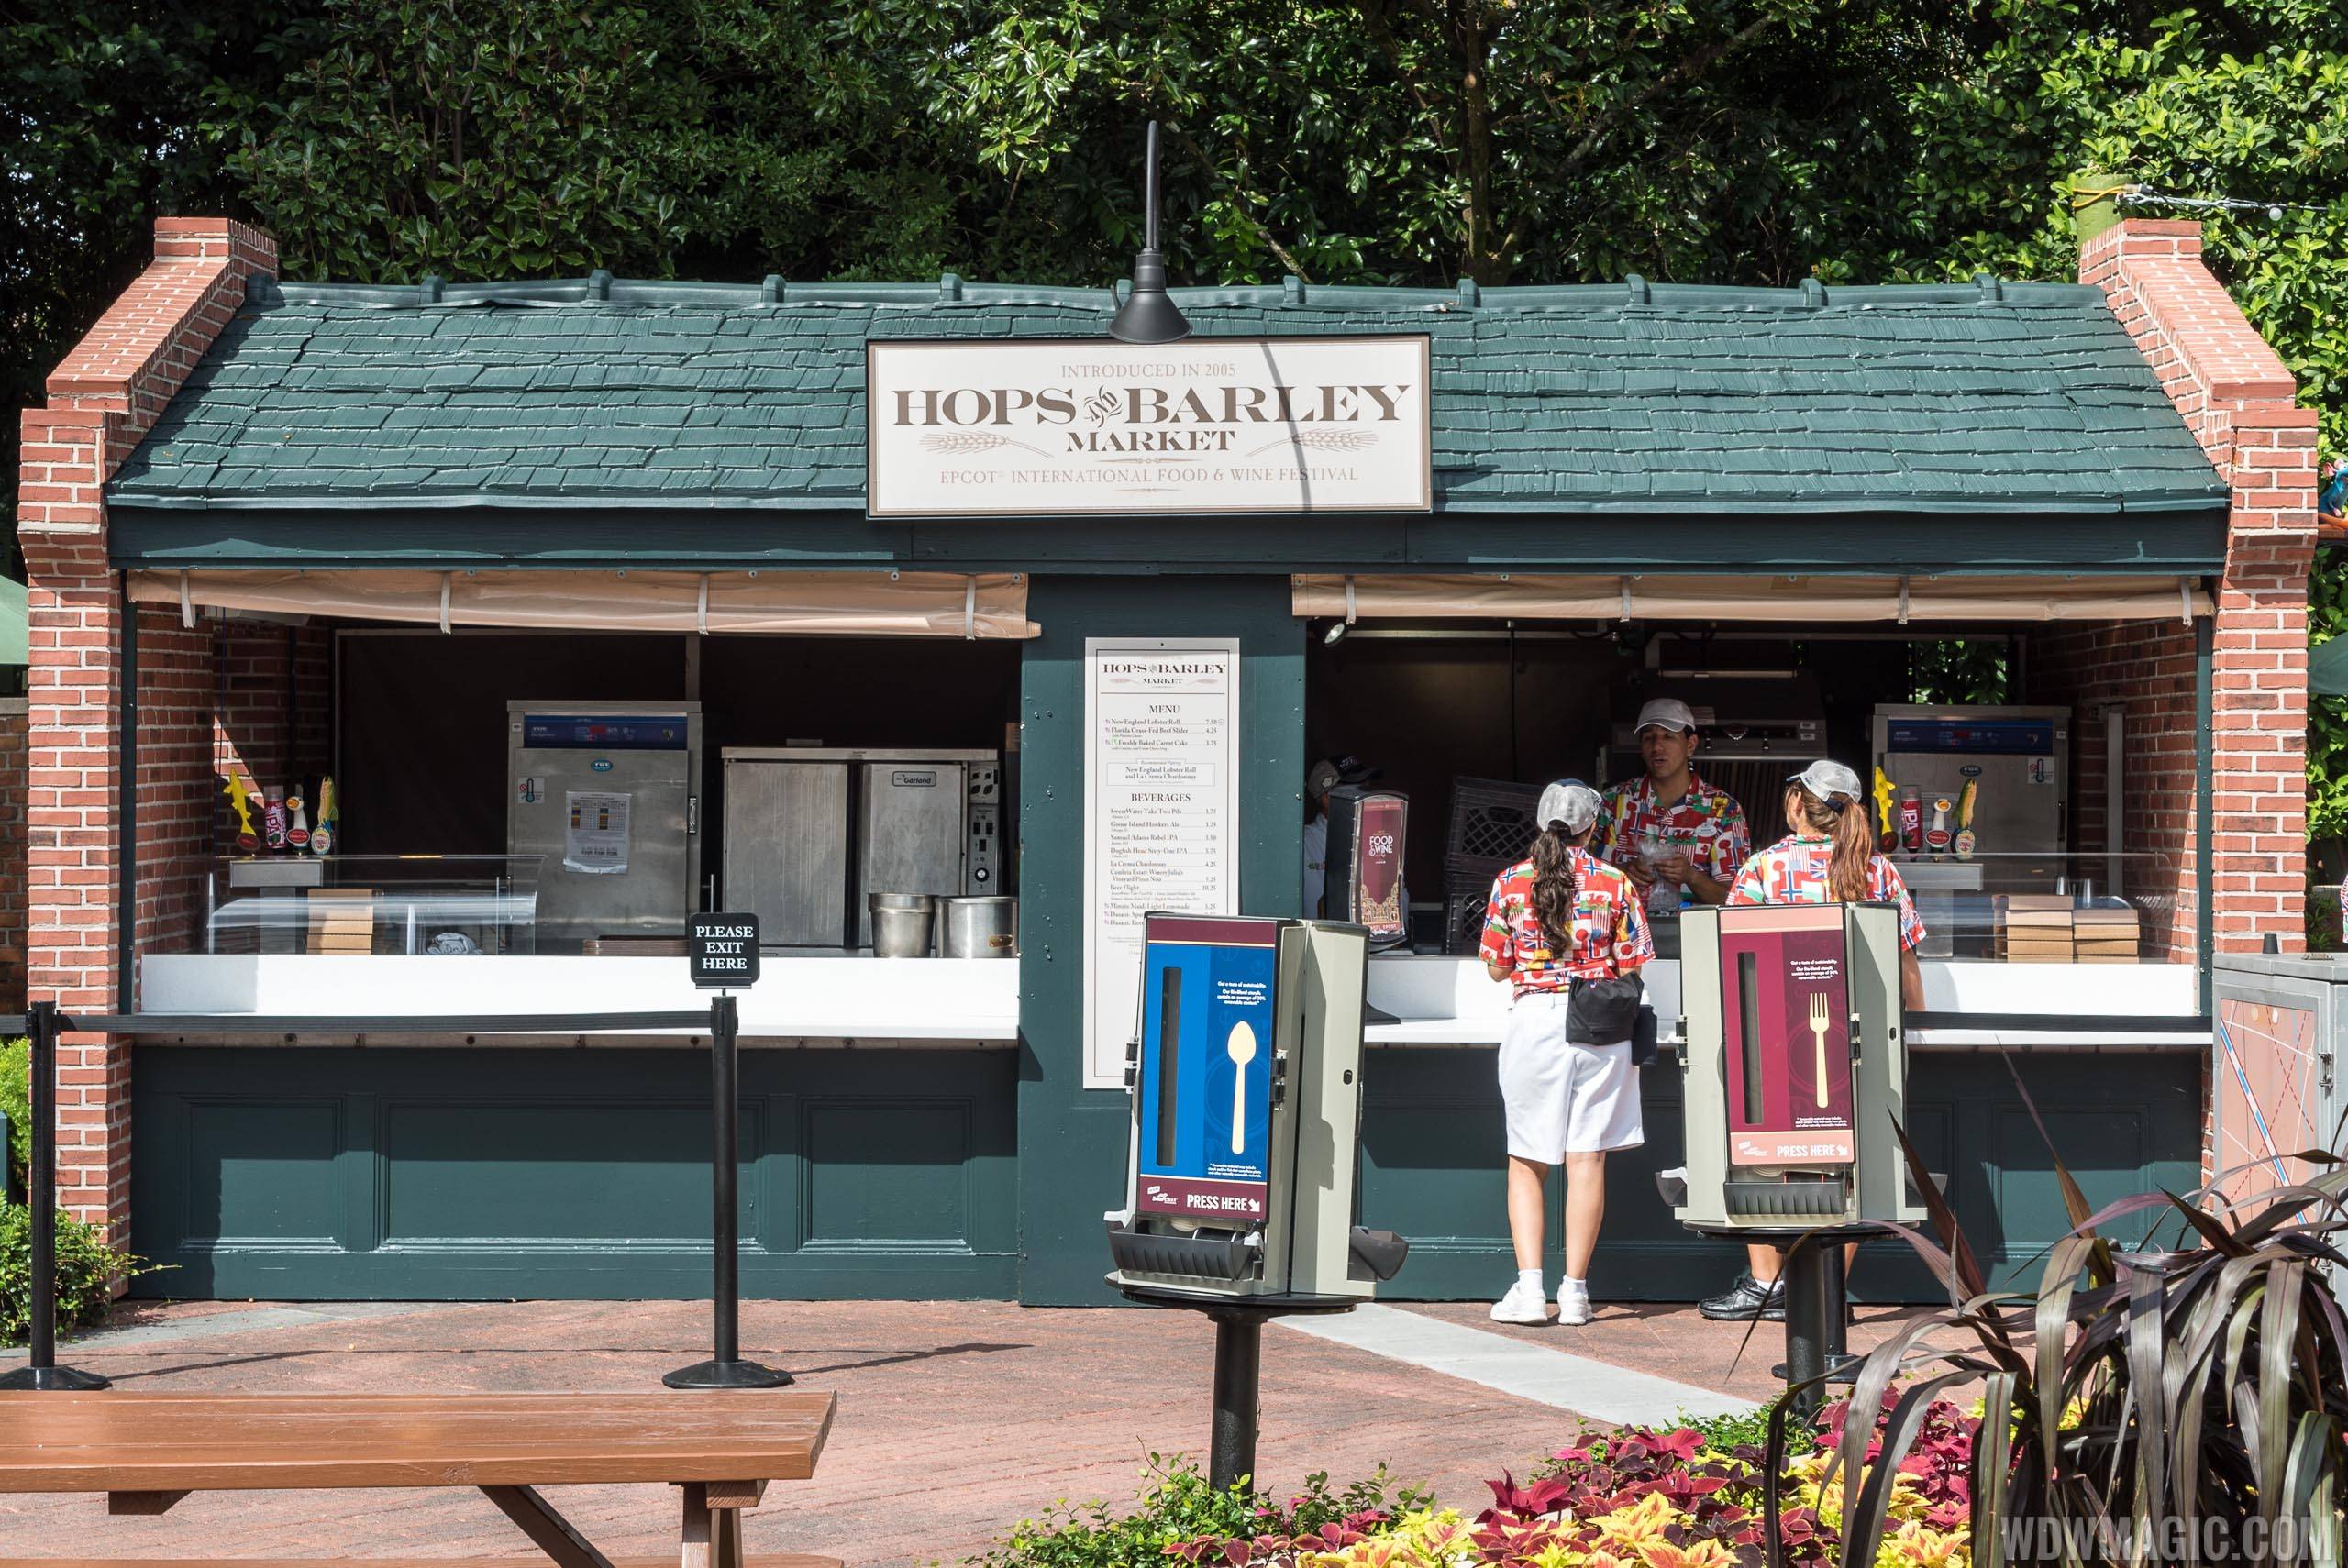 2015 Epcot Food and Wine Festival Marketplace kiosk - Hops and Barley